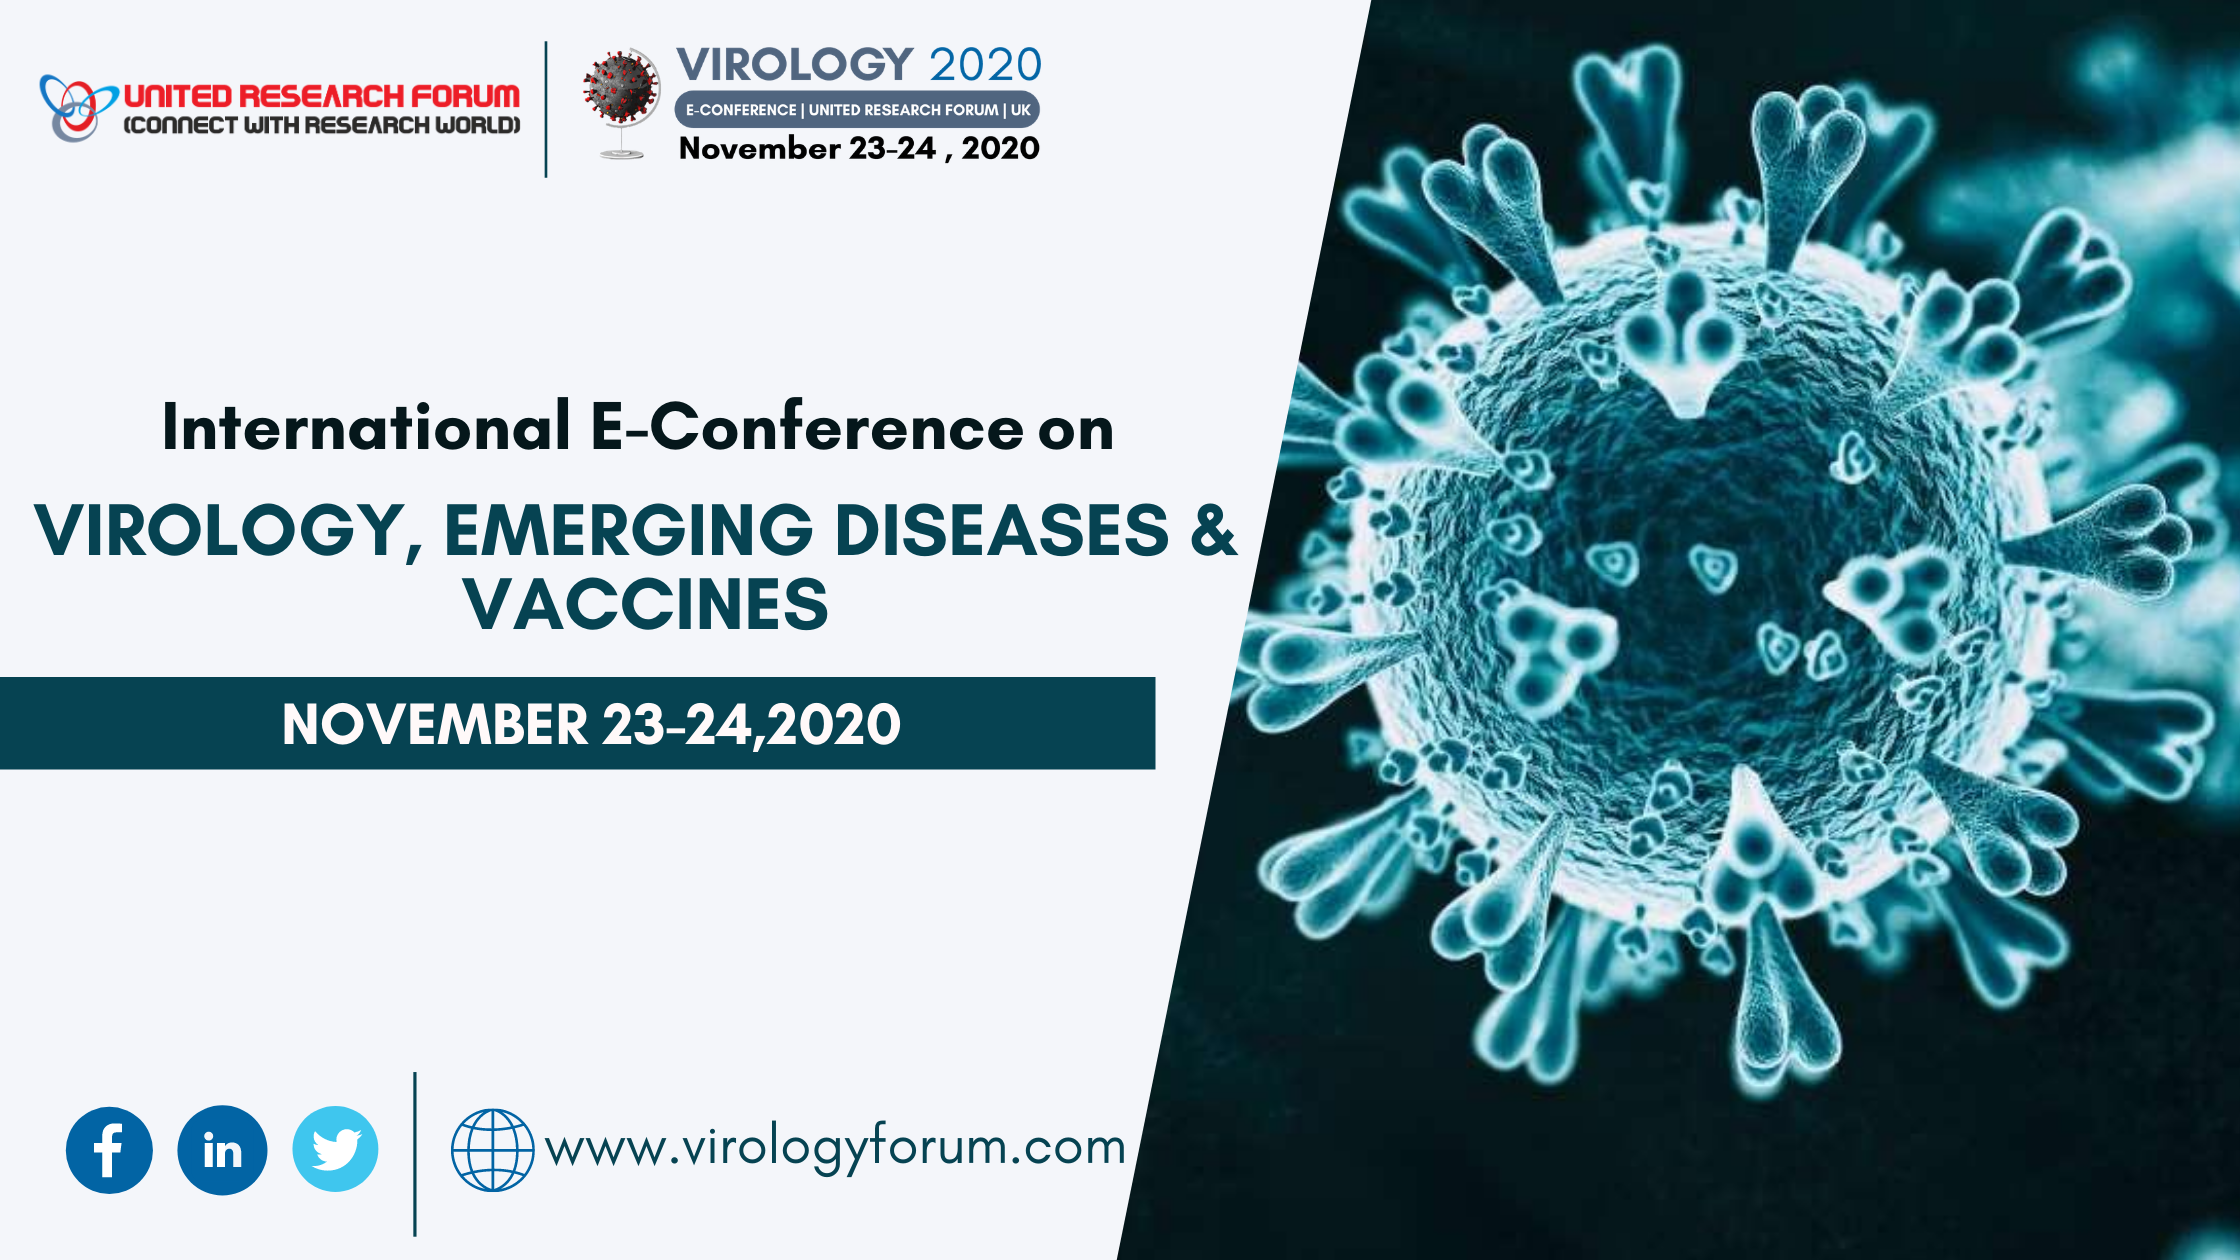 International E-Conference on Virology, Emerging Diseases and Vaccine